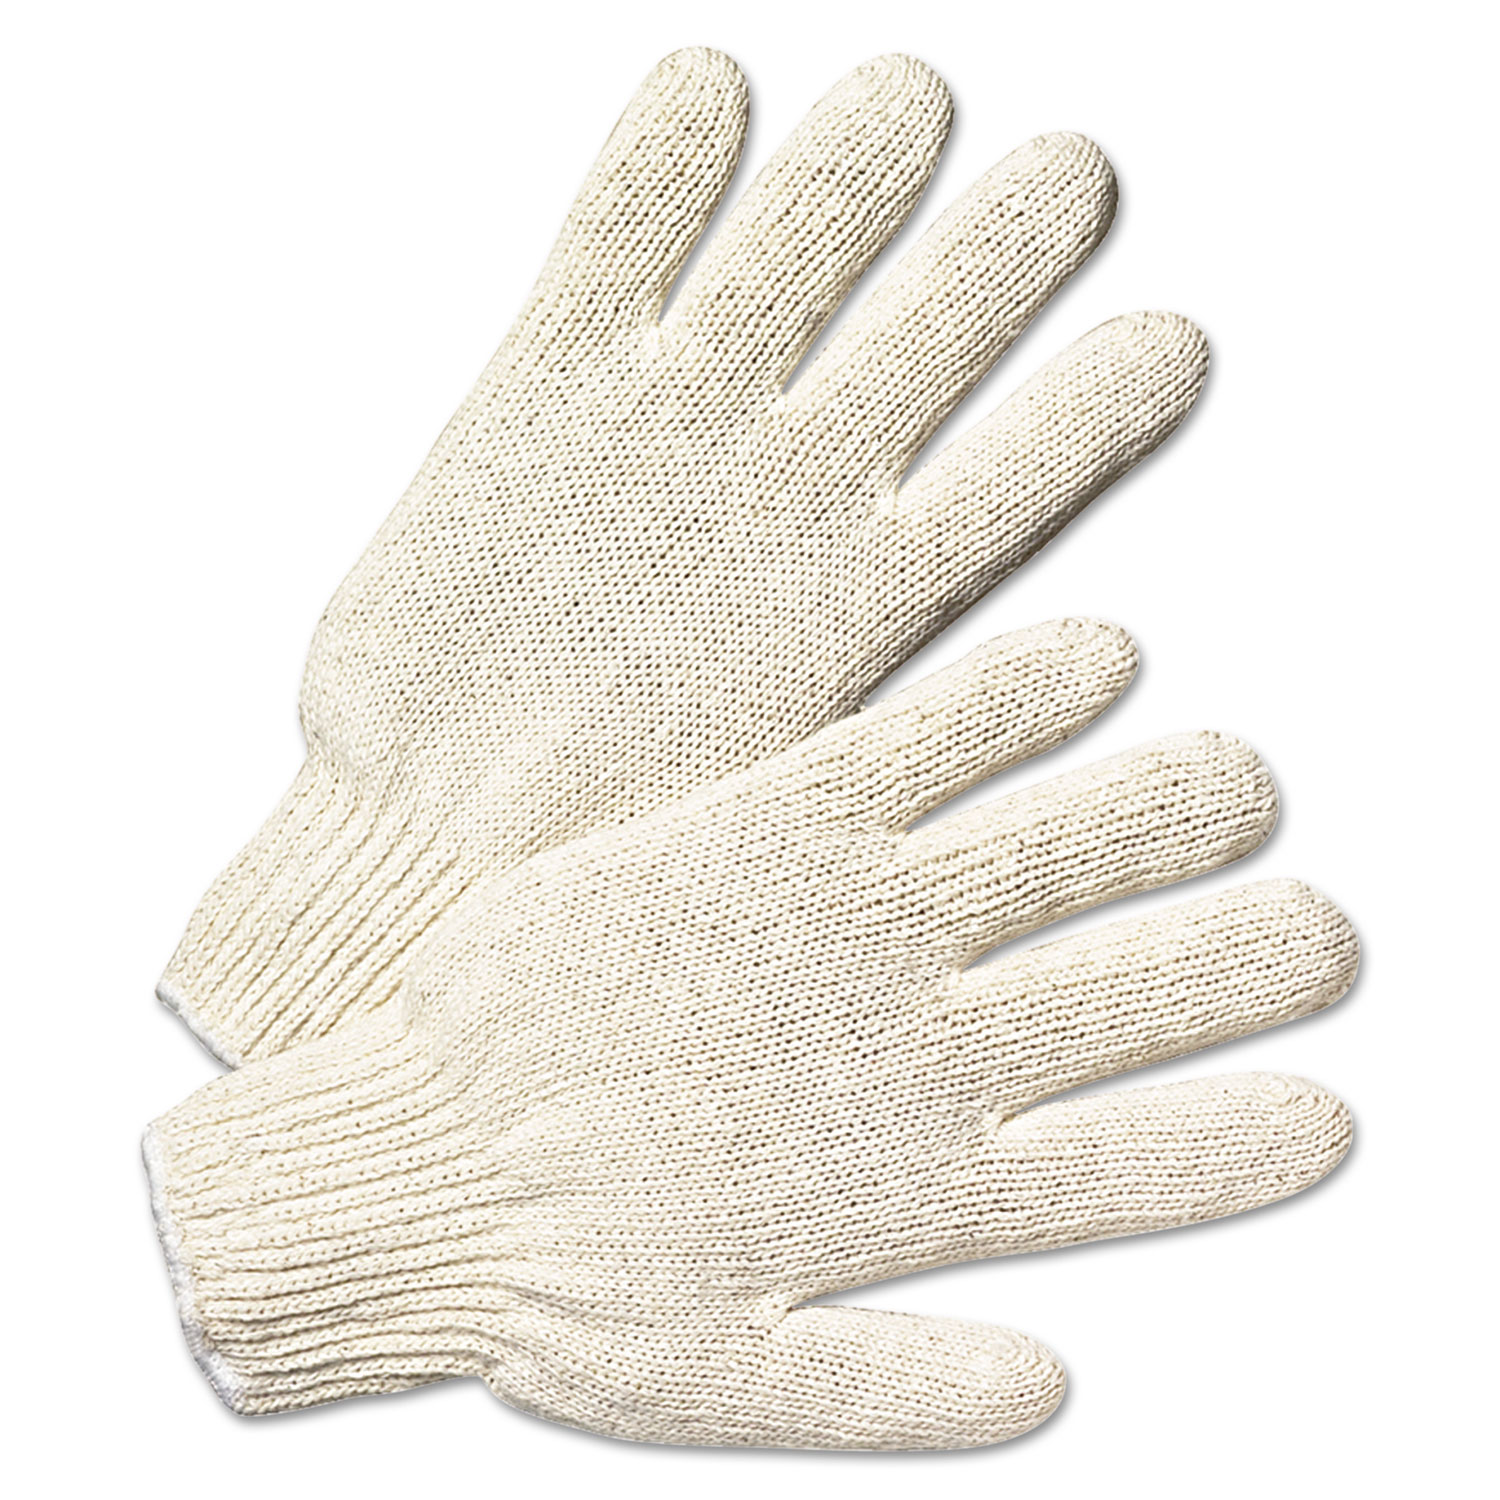  Anchor Brand 708S String Knit Gloves, Large, Natural White, 12 Pairs (ANR6700) 